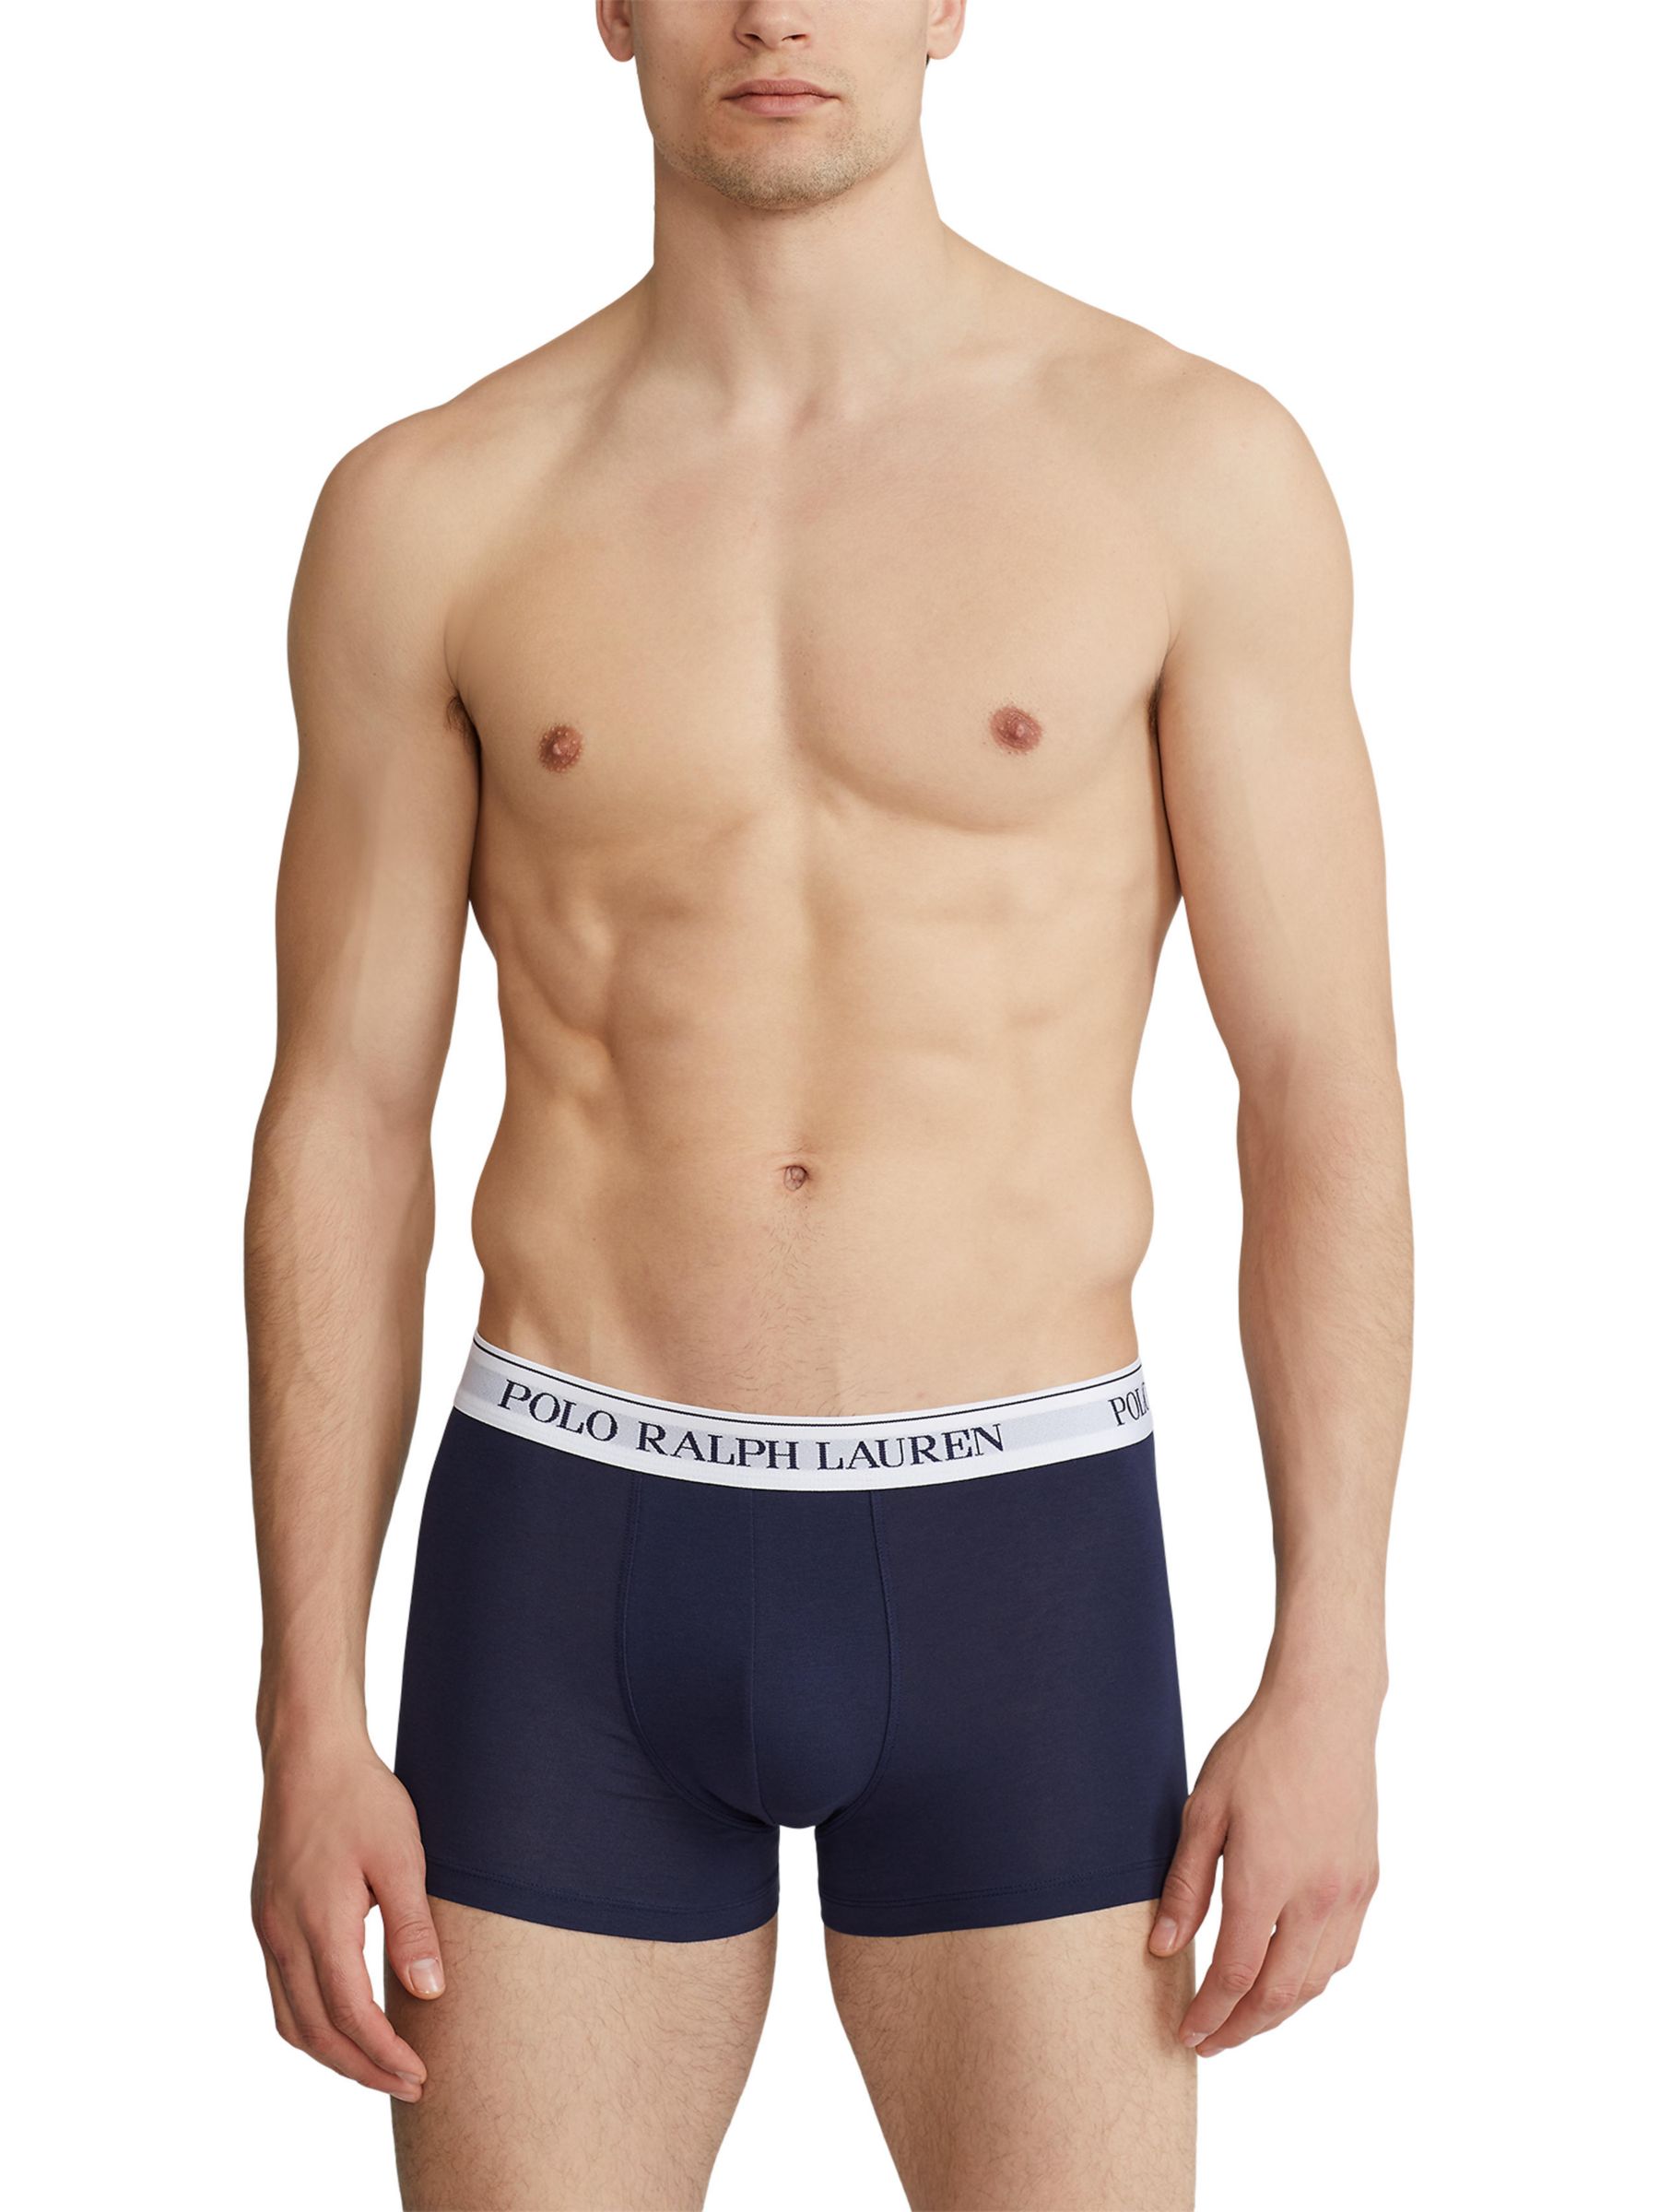 Polo Ralph Lauren Stretch Cotton Trunks, Pack of 3, Navy Print, S